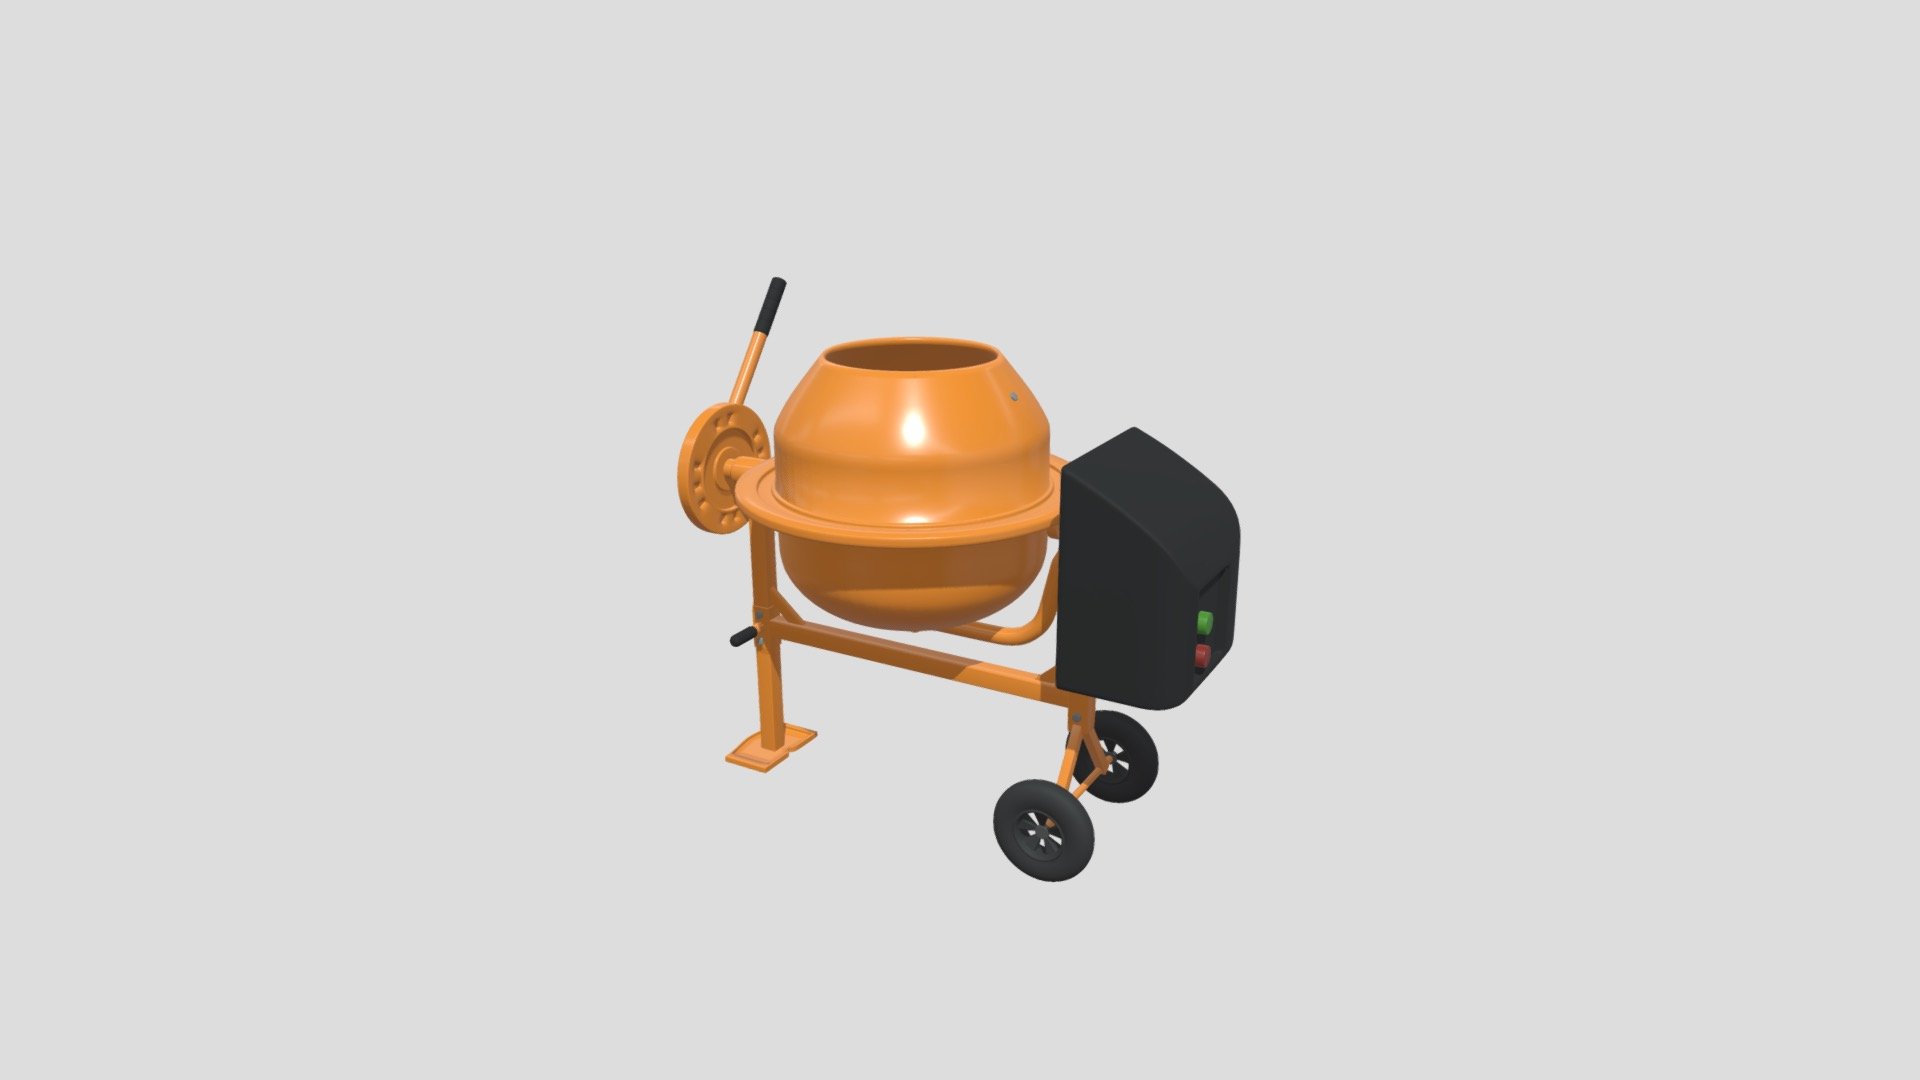 Subdivision Level: 1

Mirrored.

Textures: 64 x 64, Five colors on texture: Orange, Red, Green, Black, Grey.

Materials: 6 - Metal, Wheels, PlasticBox, Buttons, Screws, RubberHandles.

Formats: .stl .obj .fbx .dae

Rigged.

Origin located on bottom-center

Polygons: 103454

Vertices: 51791

I hope you enjoy the model! - Mini Concrete Mixer - Buy Royalty Free 3D model by Ed+ (@EDplus) 3d model